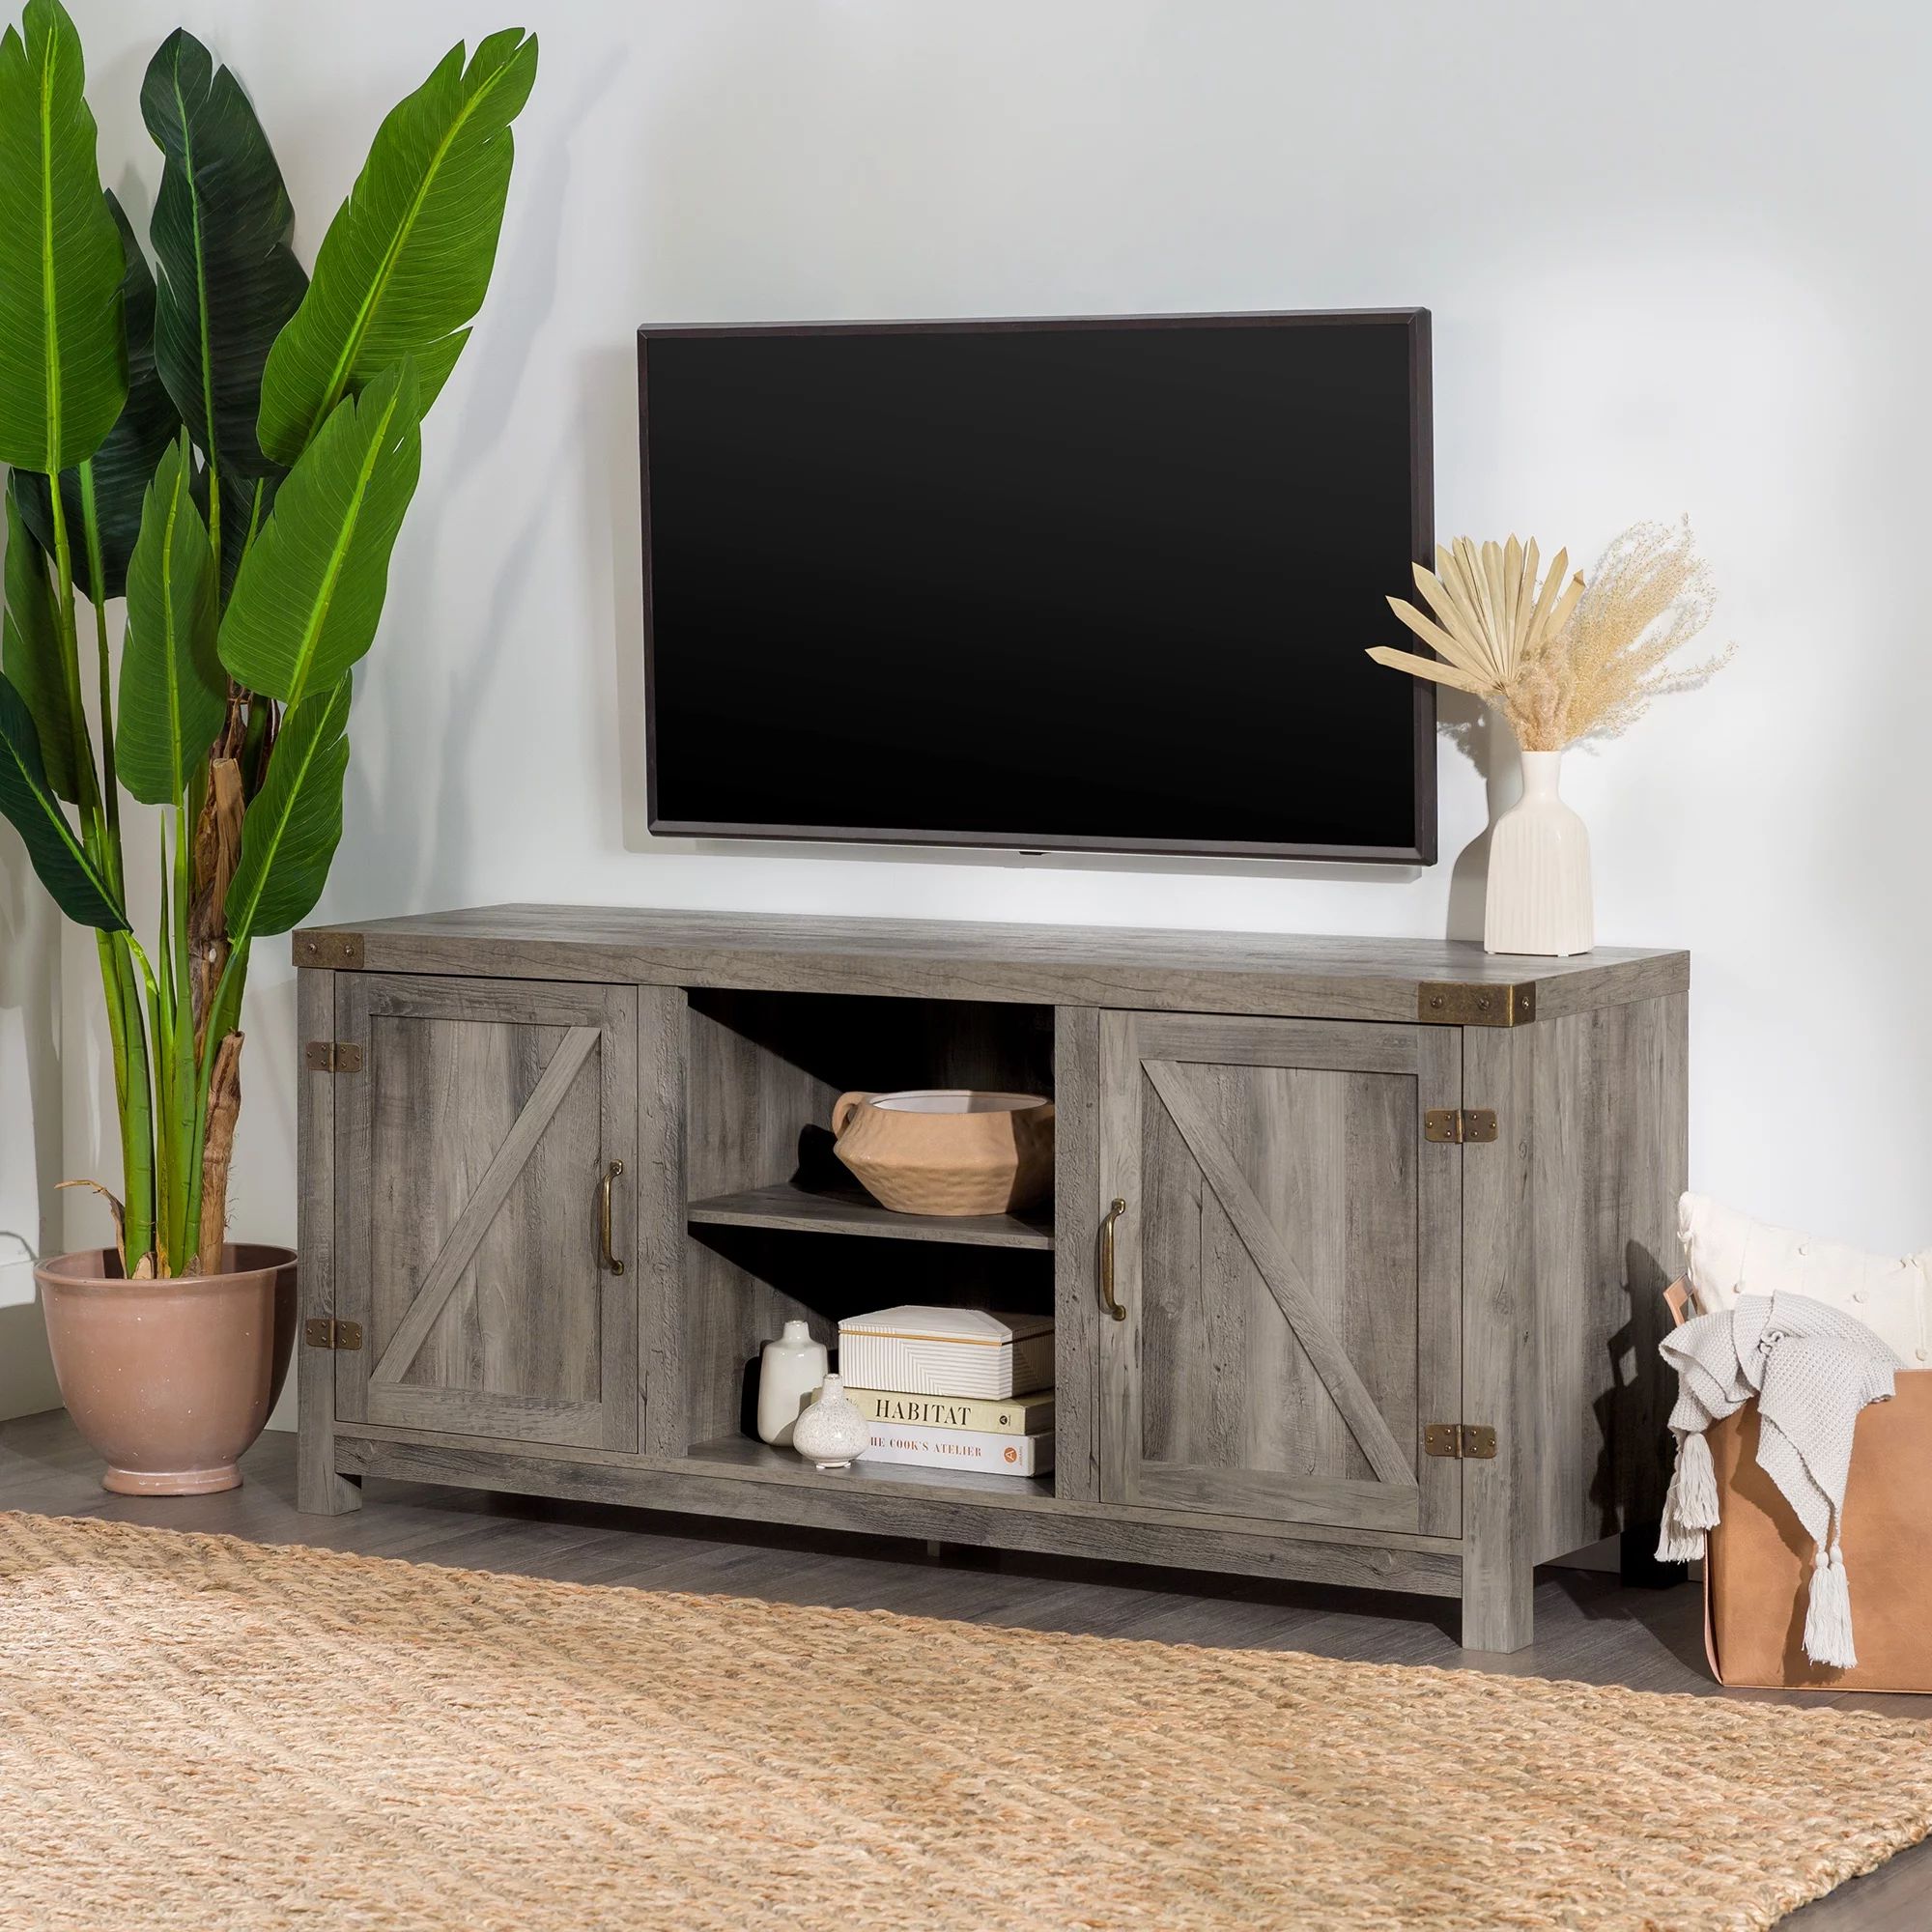 Woven Paths Modern Farmhouse Barn Door TV Stand for TVs up to 65", Grey Wash | Walmart (US)